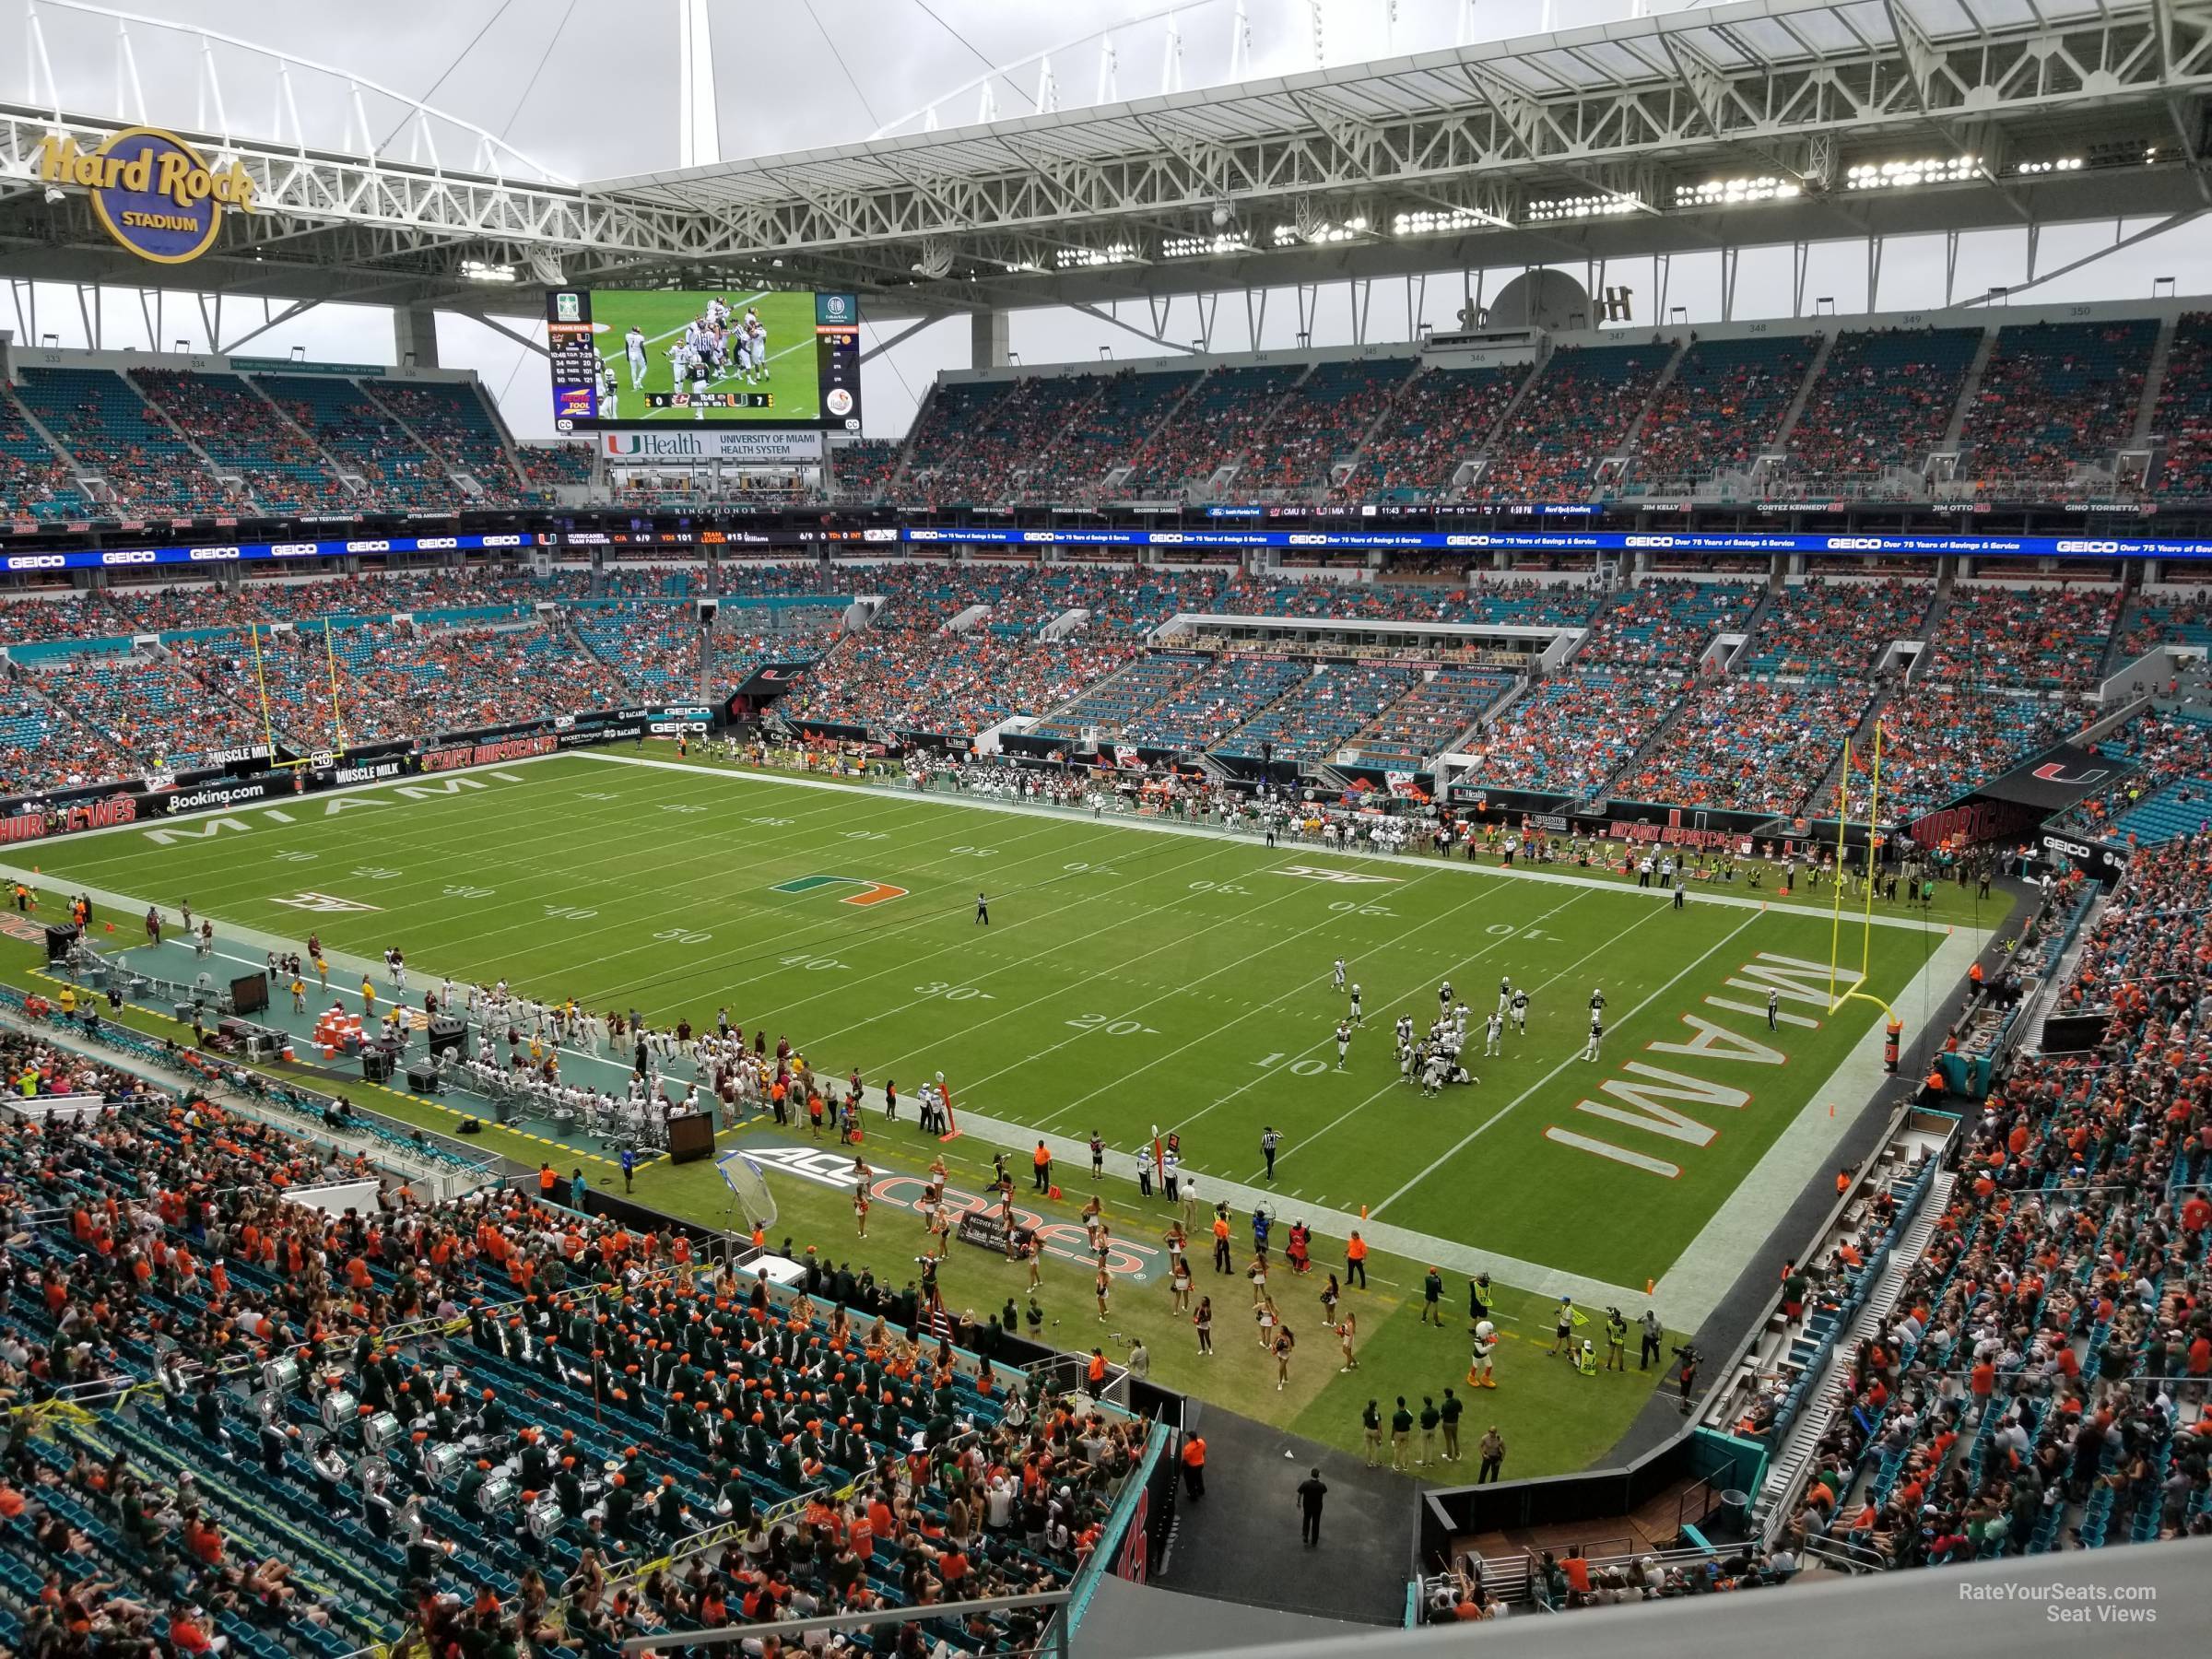 section 311, row 2w seat view  for football - hard rock stadium